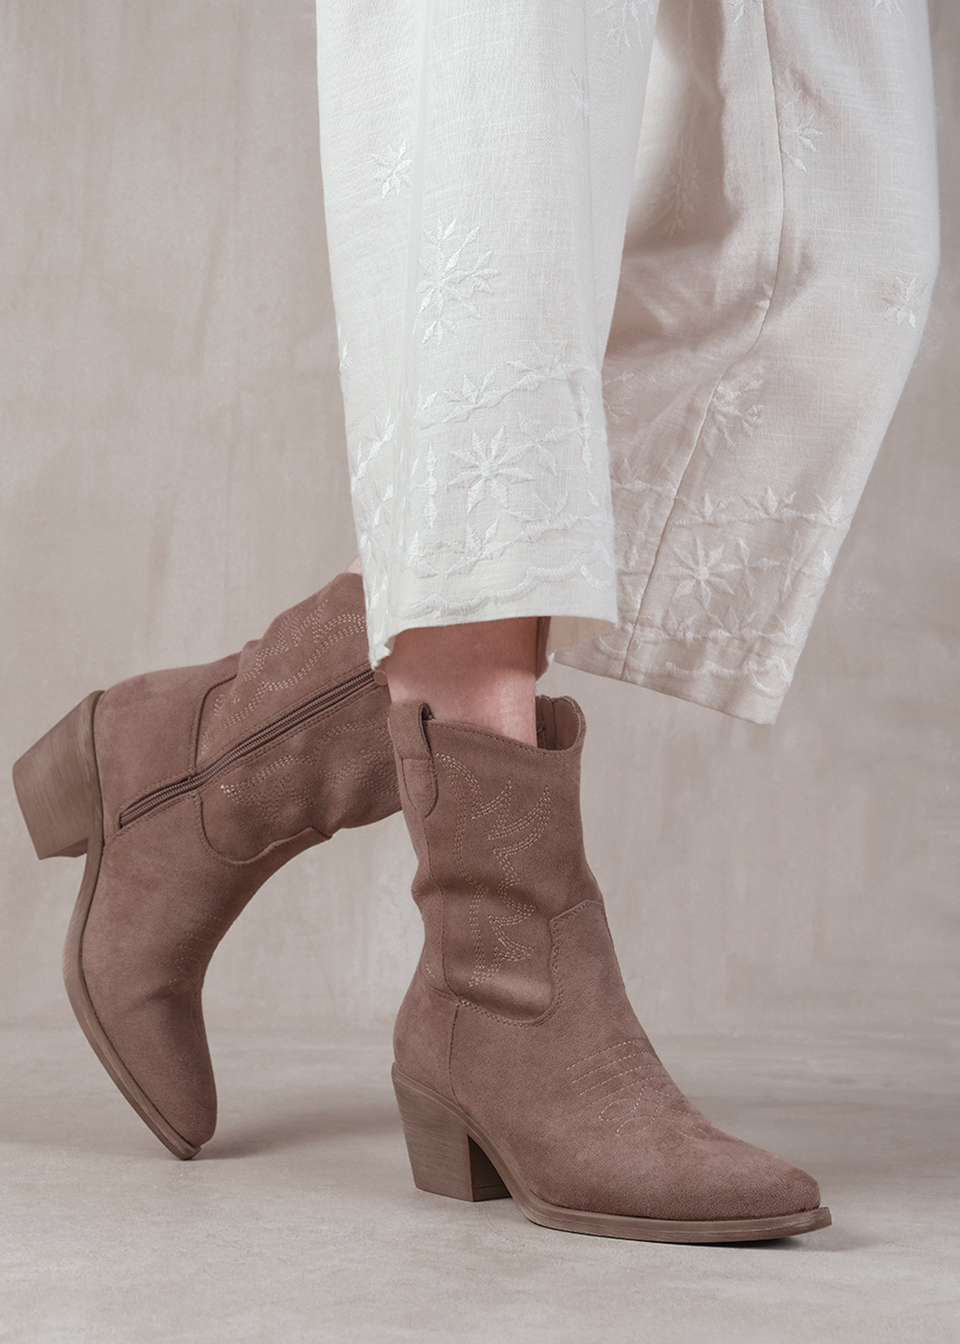 Where's That From Beige Suede Rodeo Cowboy Boots With Embroidery